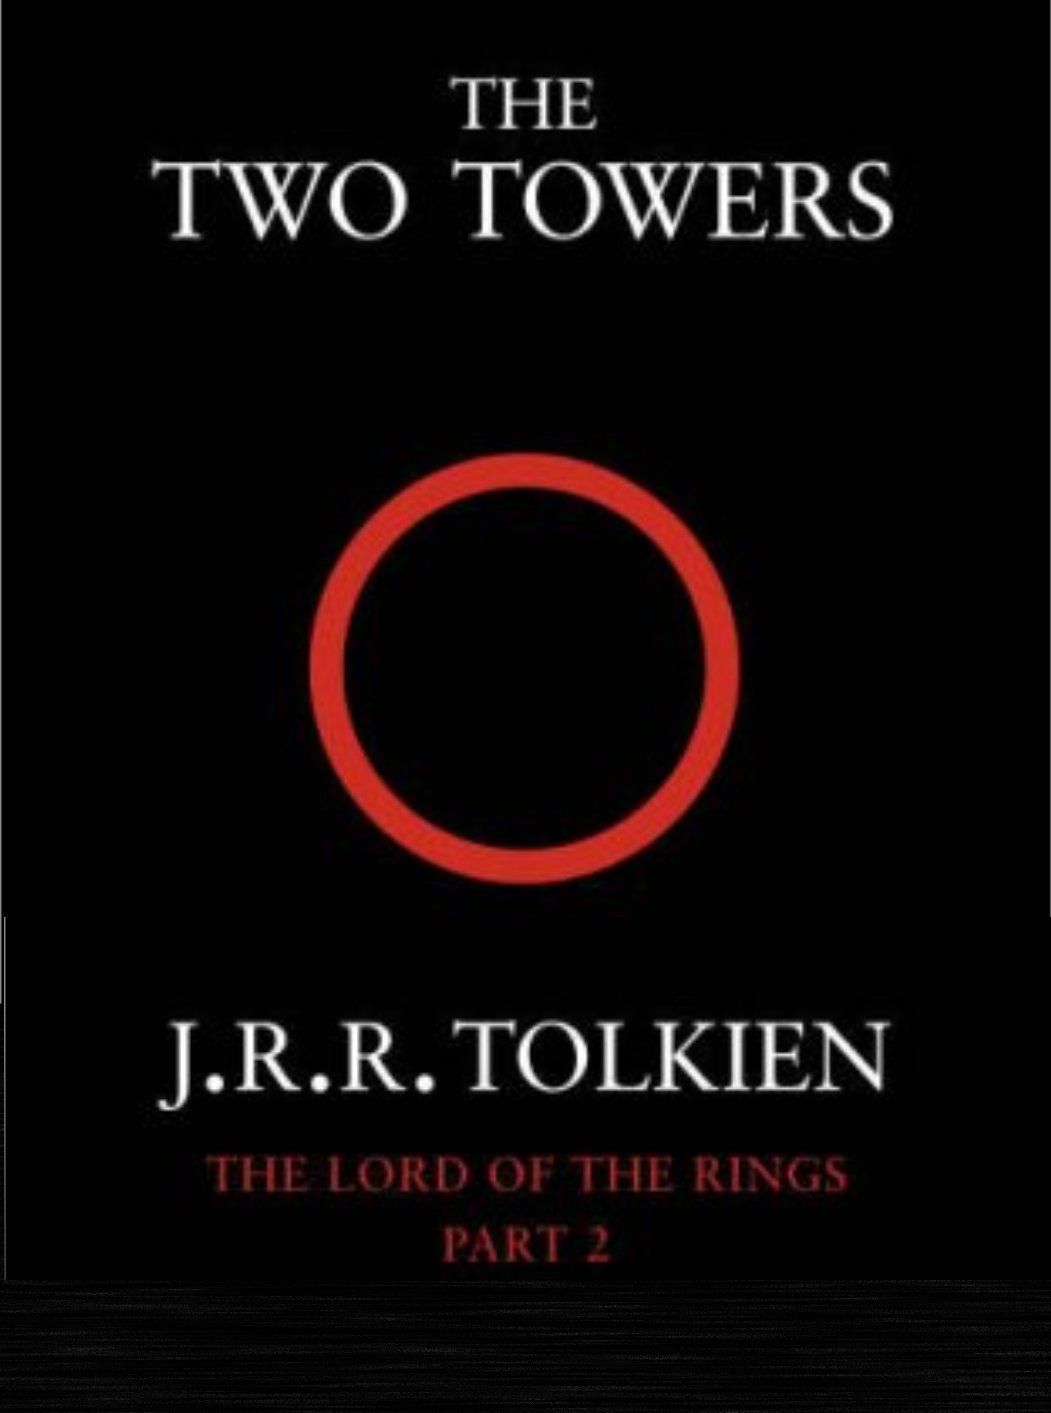 The Two Towers: Discover Middle-earth in the Bestselling Classic